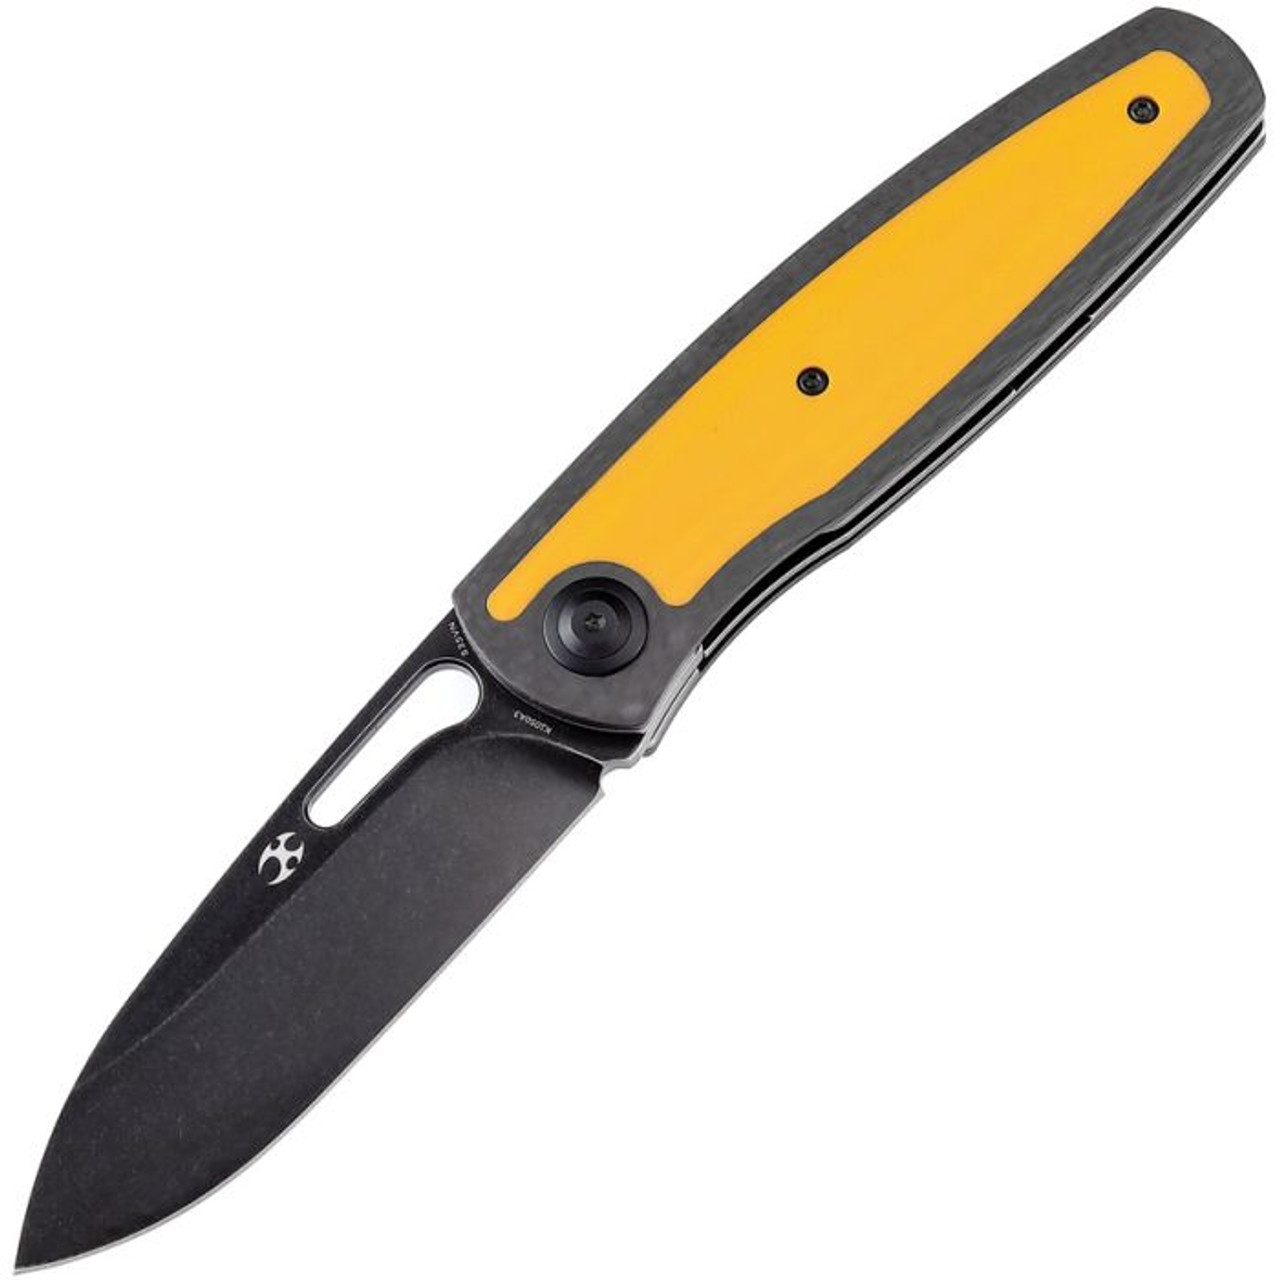 Kansept Knives Mato (K1050A3) 3.3" CPM-S35VN Blackwashed Spear Point Plain Blade, Black Carbon Fiber Handle with Yellow G-10 Onlay